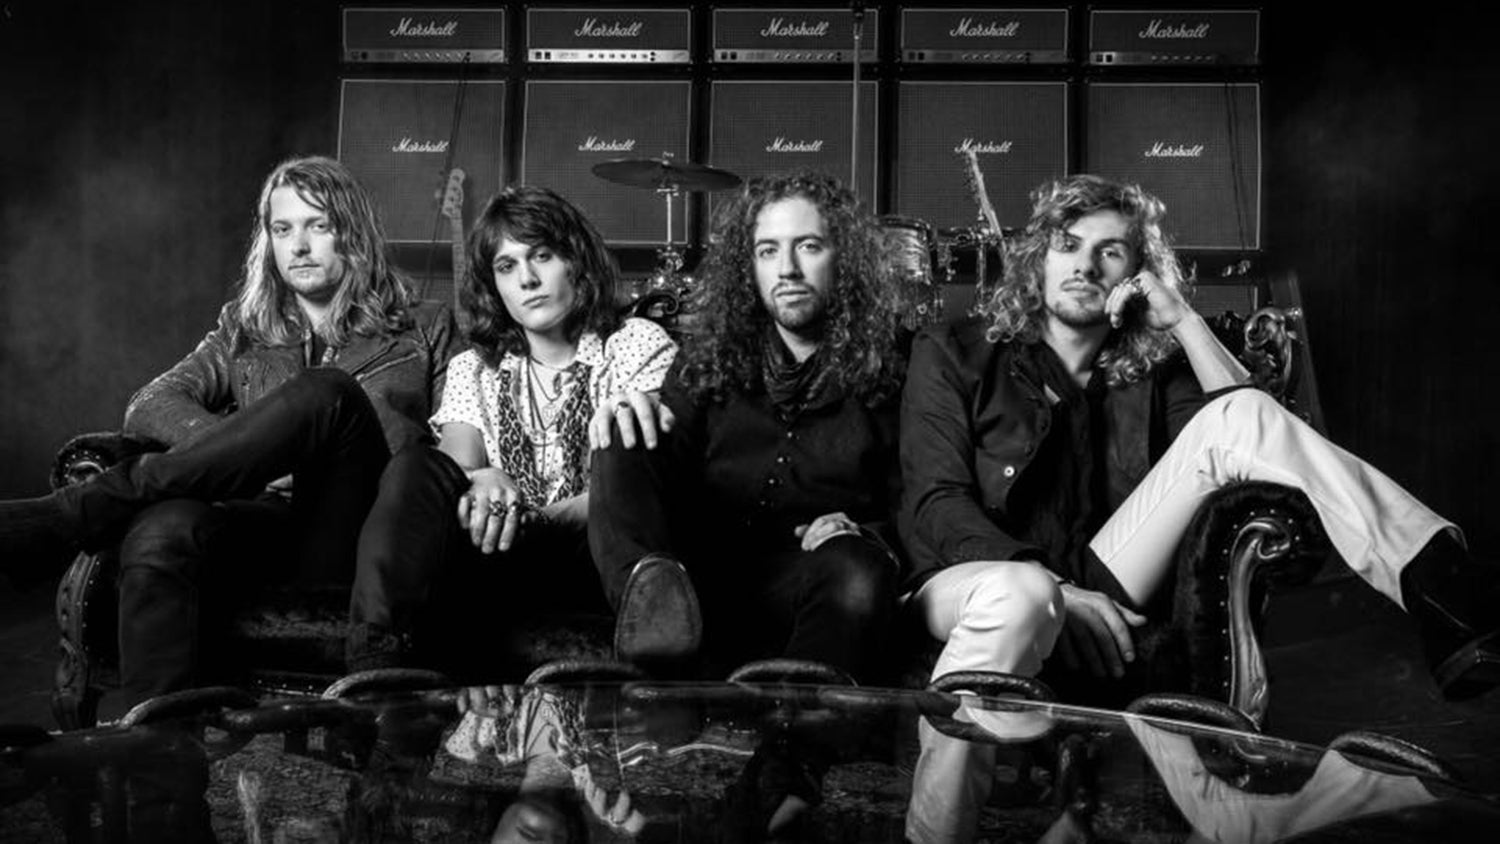 Tyler Bryant & The Shakedown at Manchester Music Hall